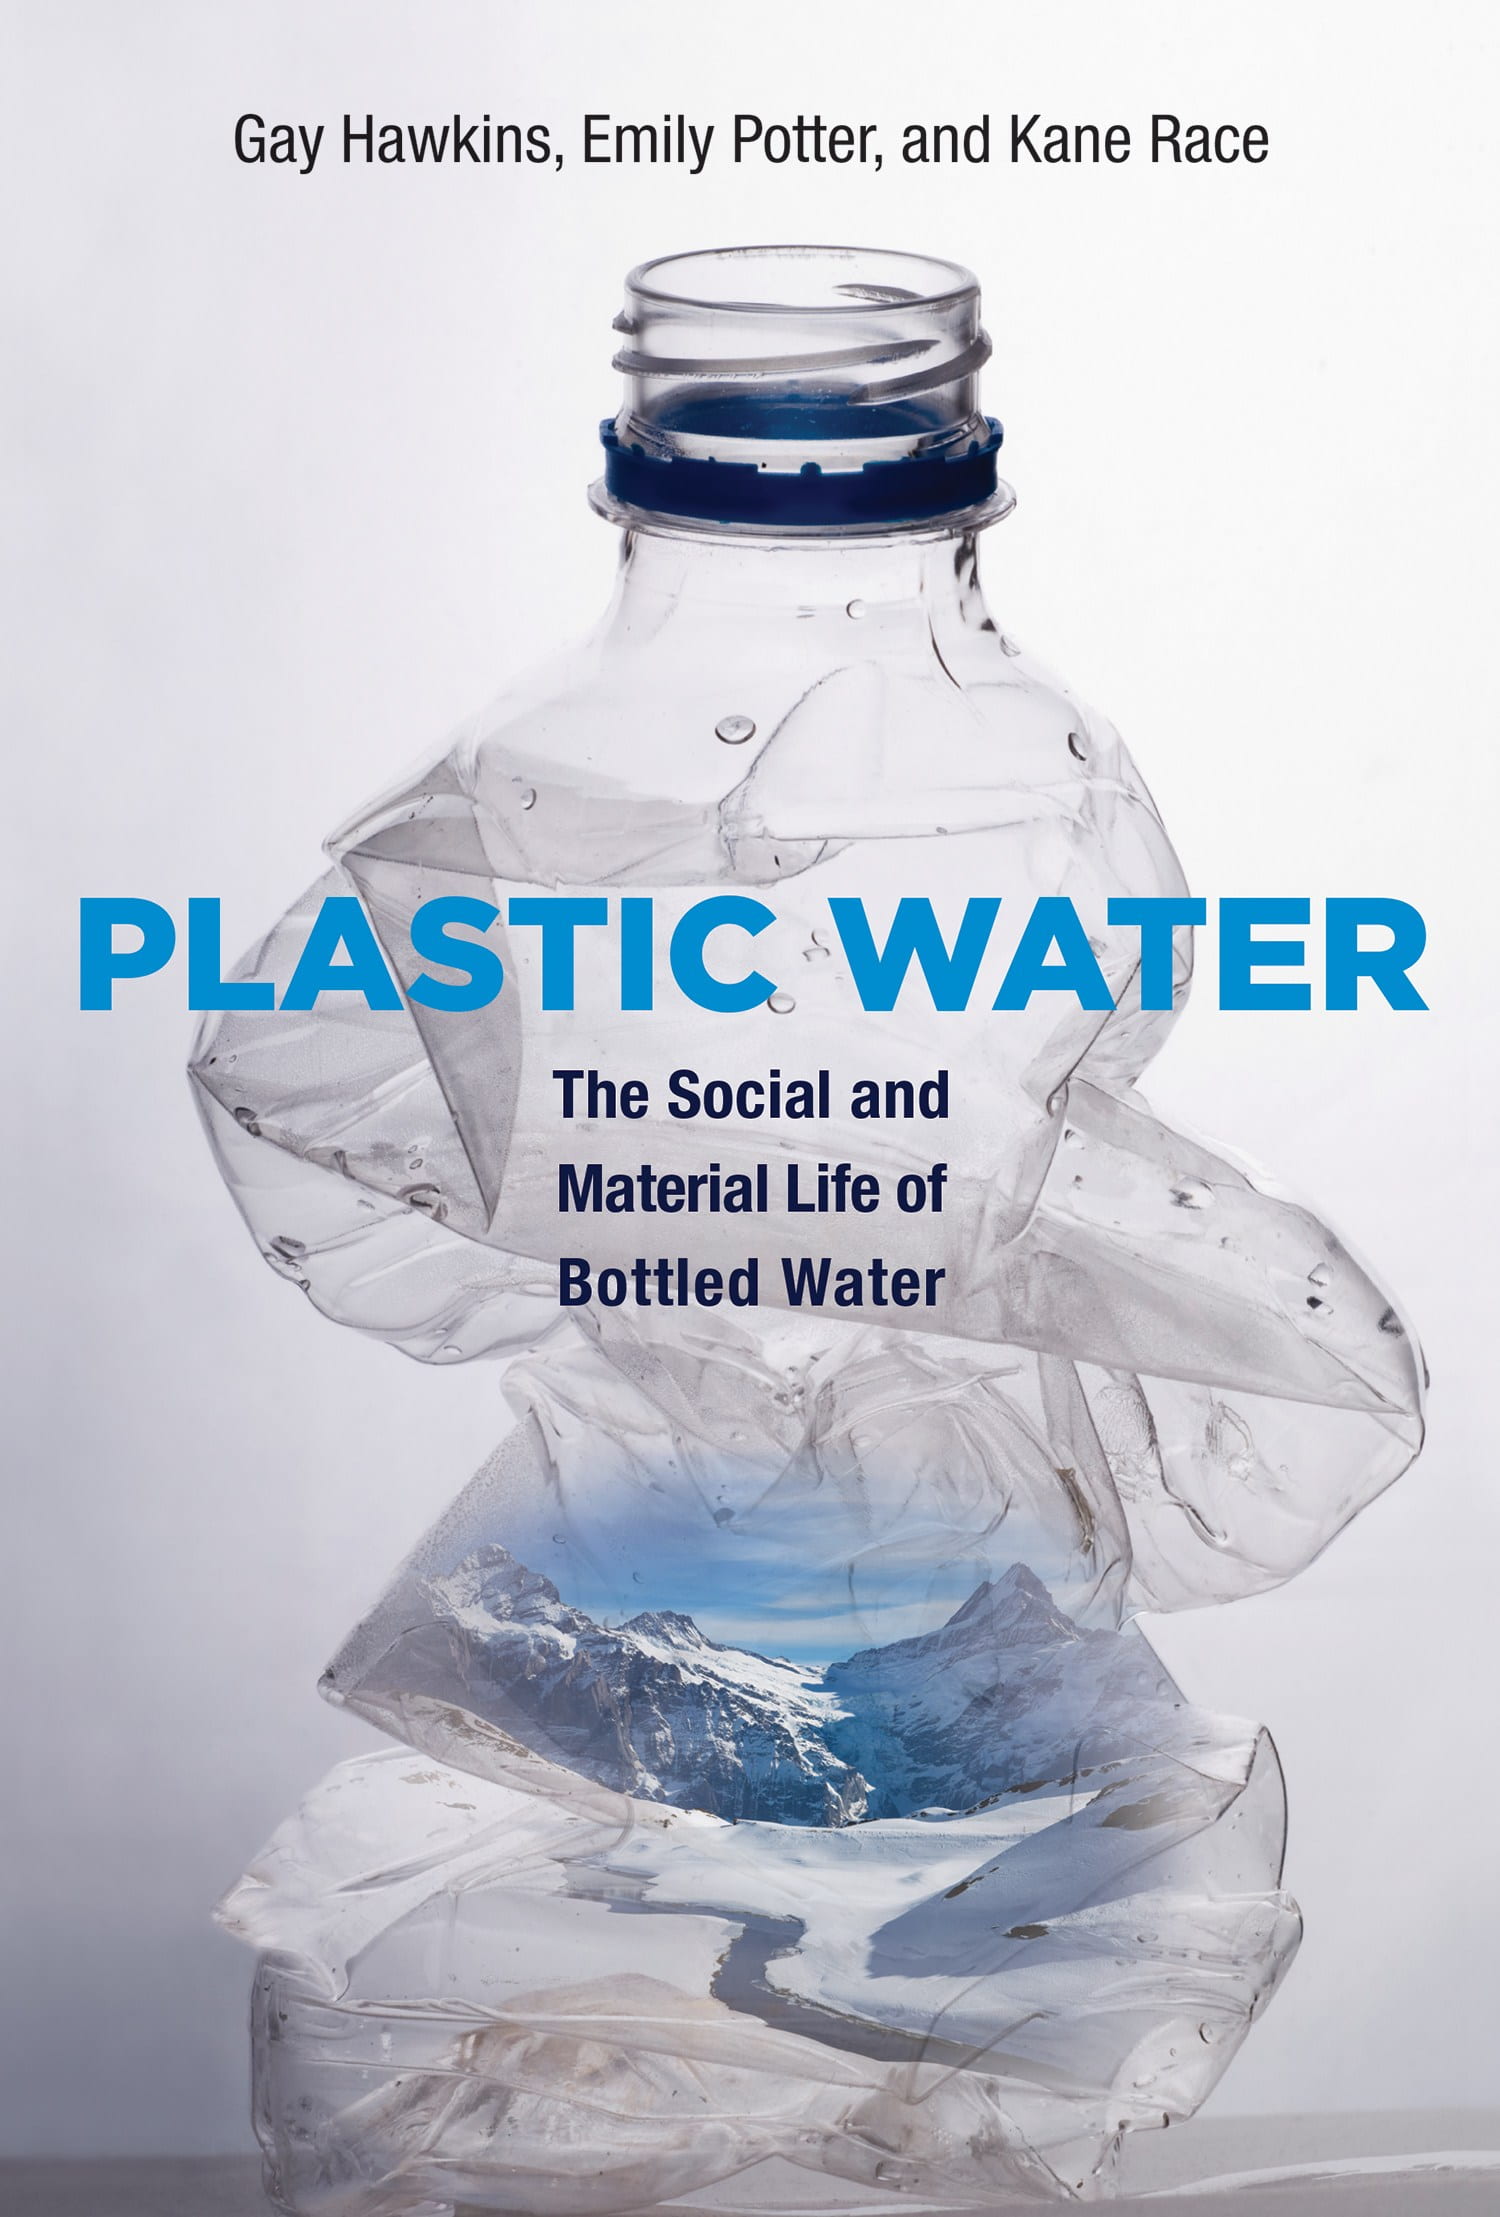 Plastic Water (book cover)